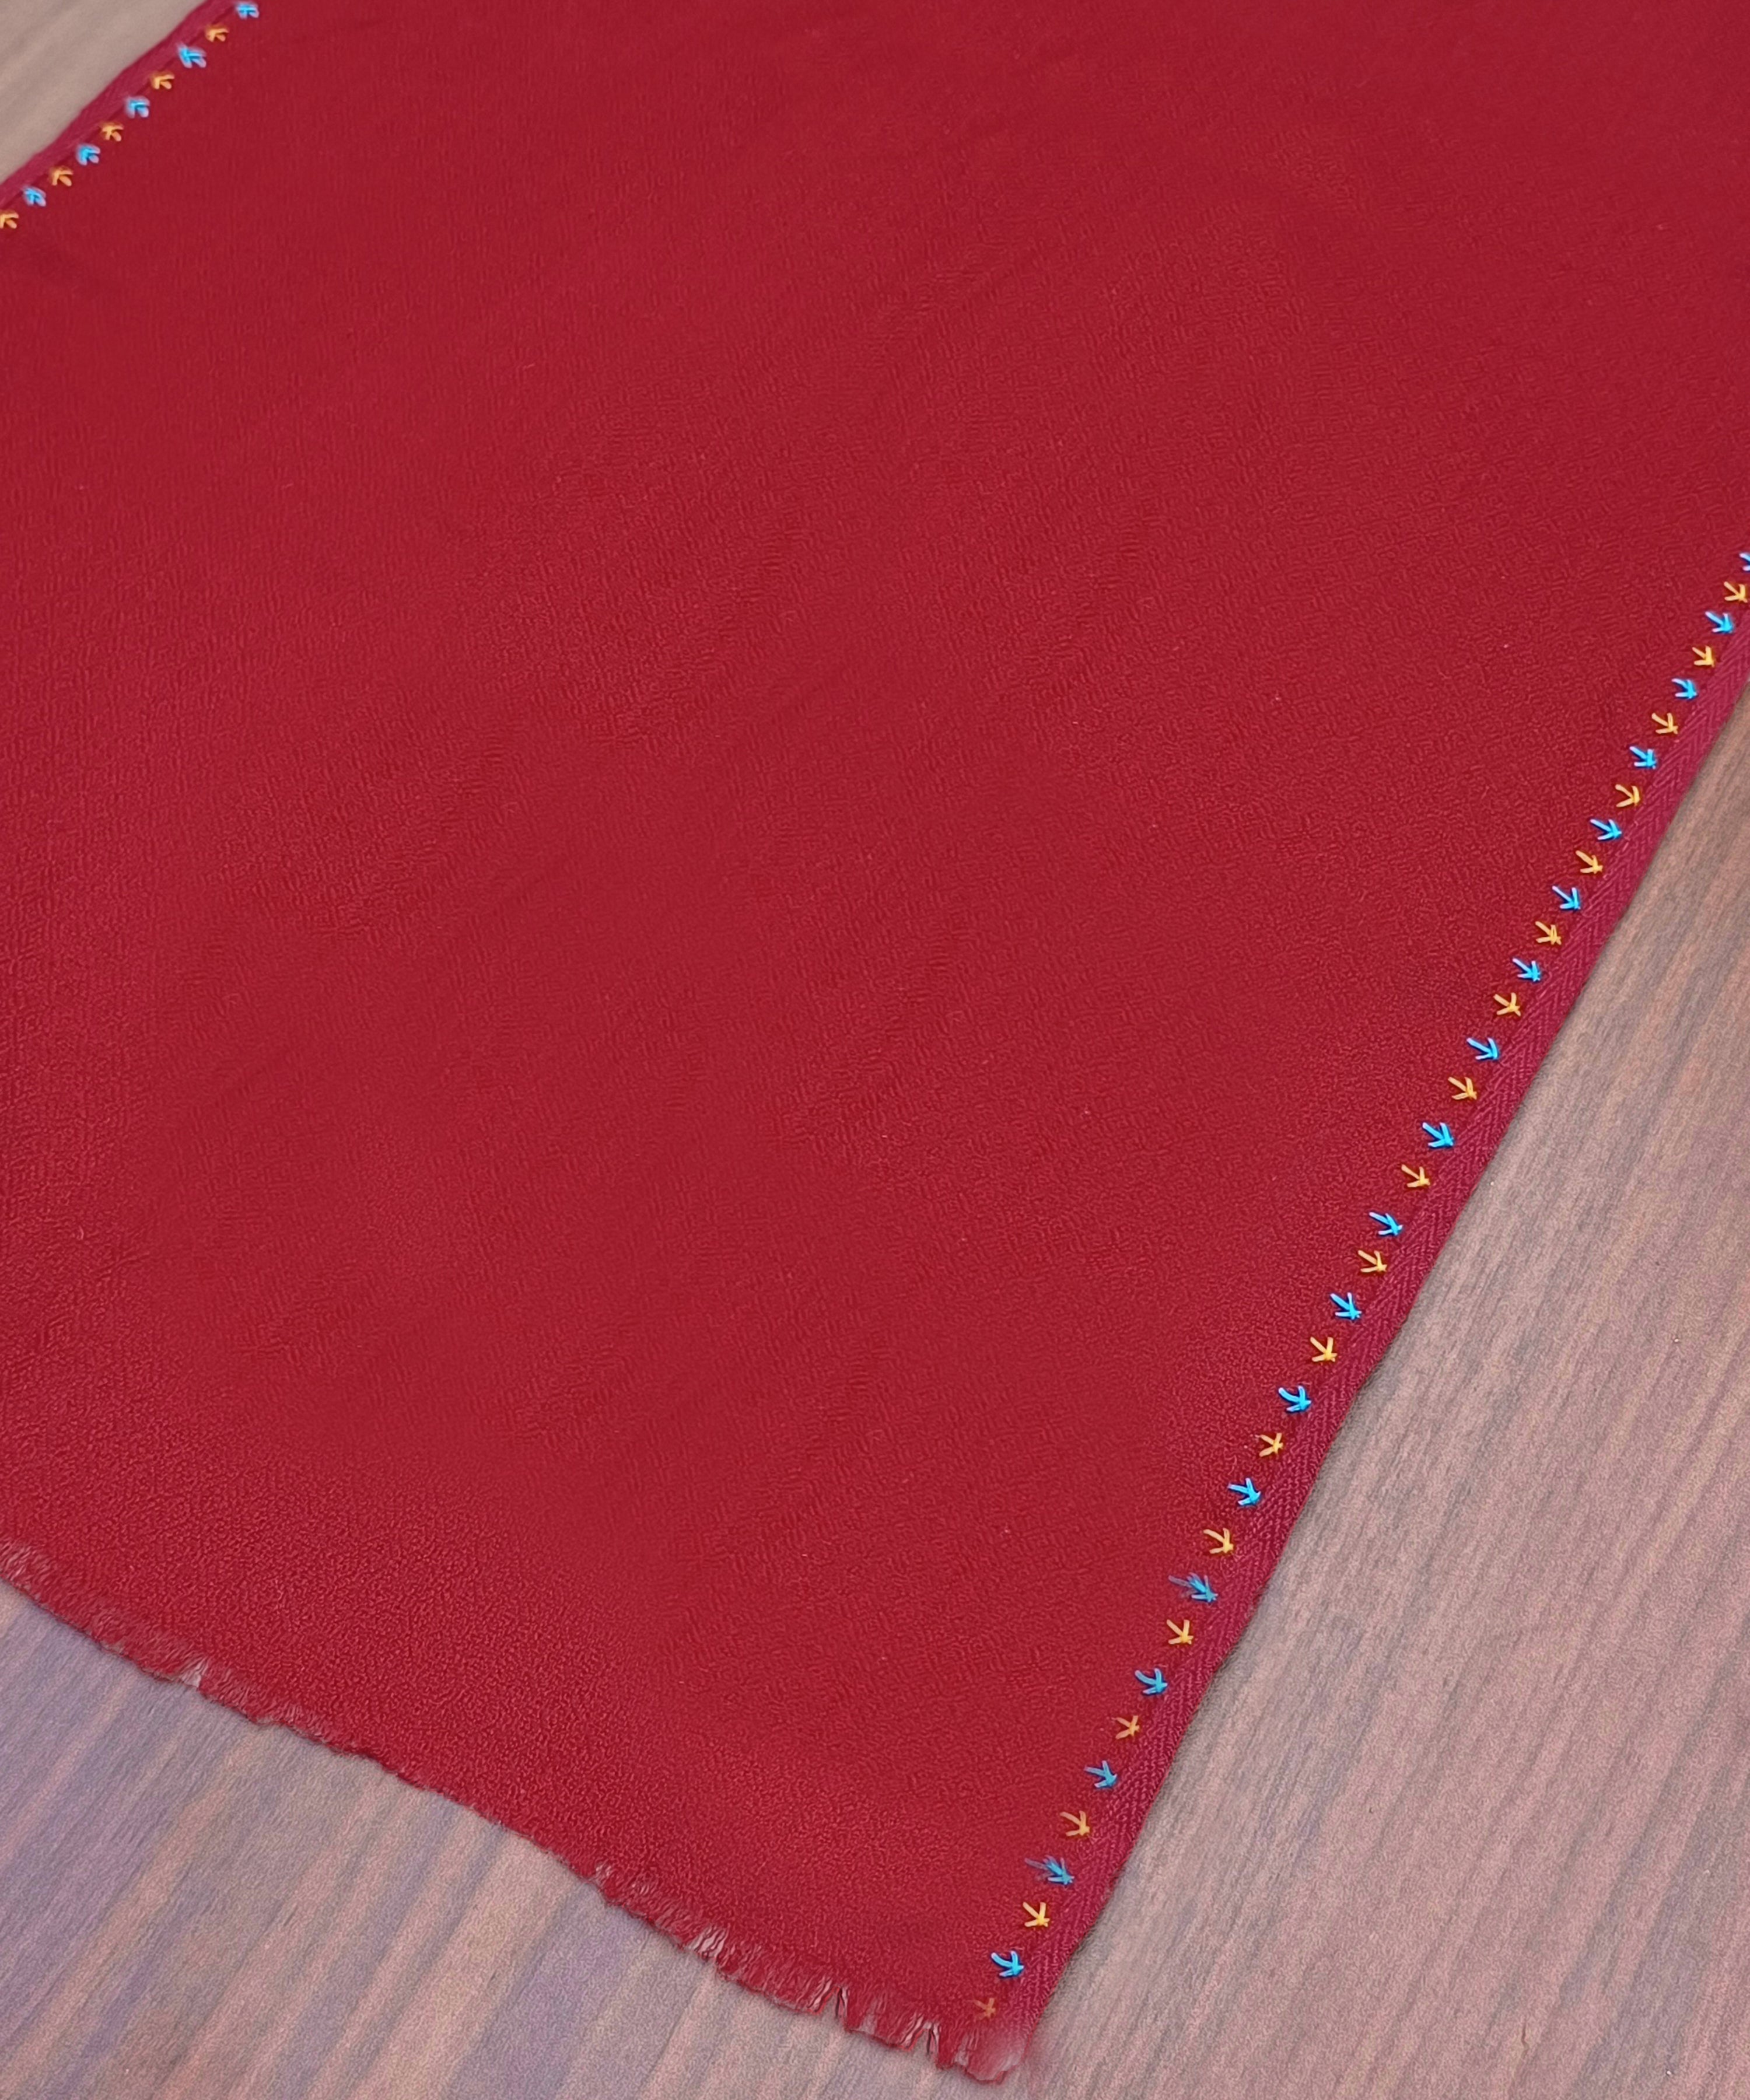 Handwoven_Maroon_Pure_Pashmina_Stole_With_Beading_And_Thread_Work_Finishing_WeaverStory_03